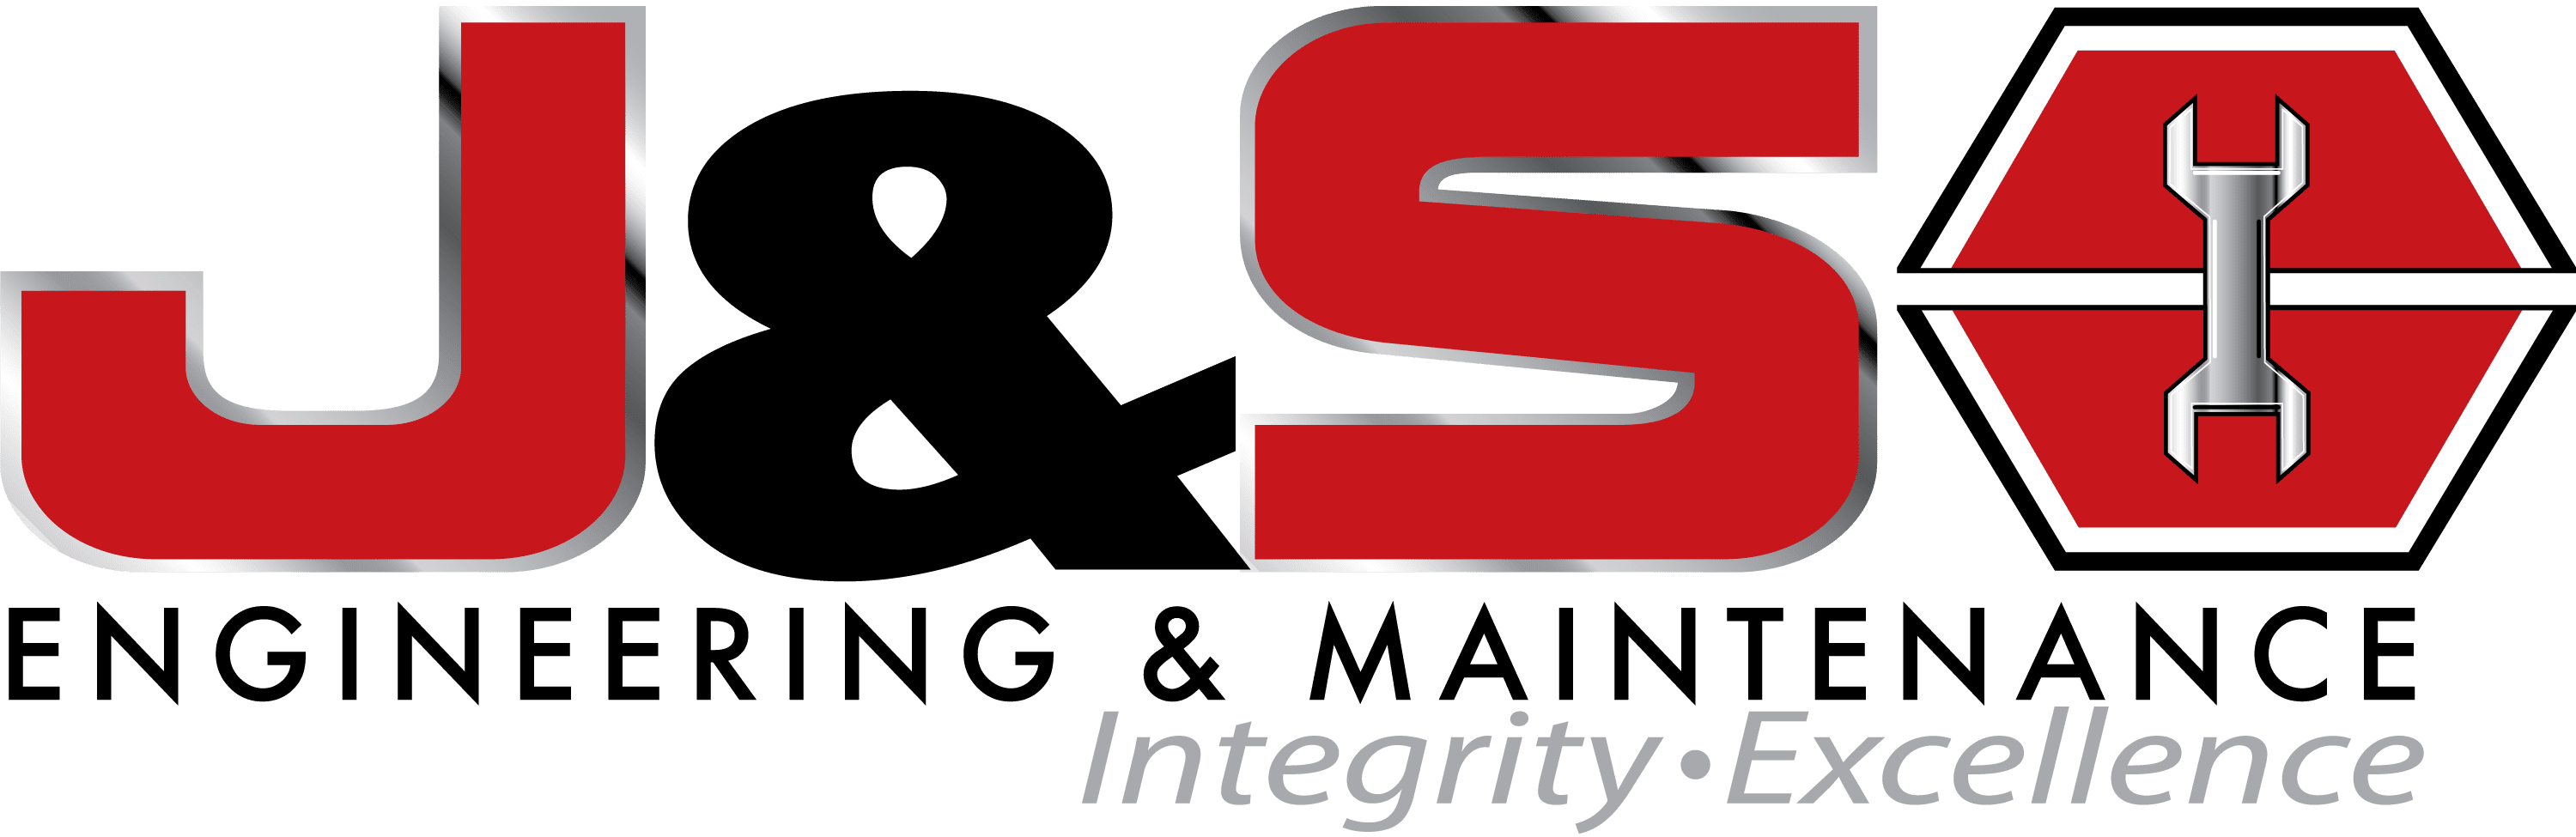 J and S Engineering and Maintenance logo